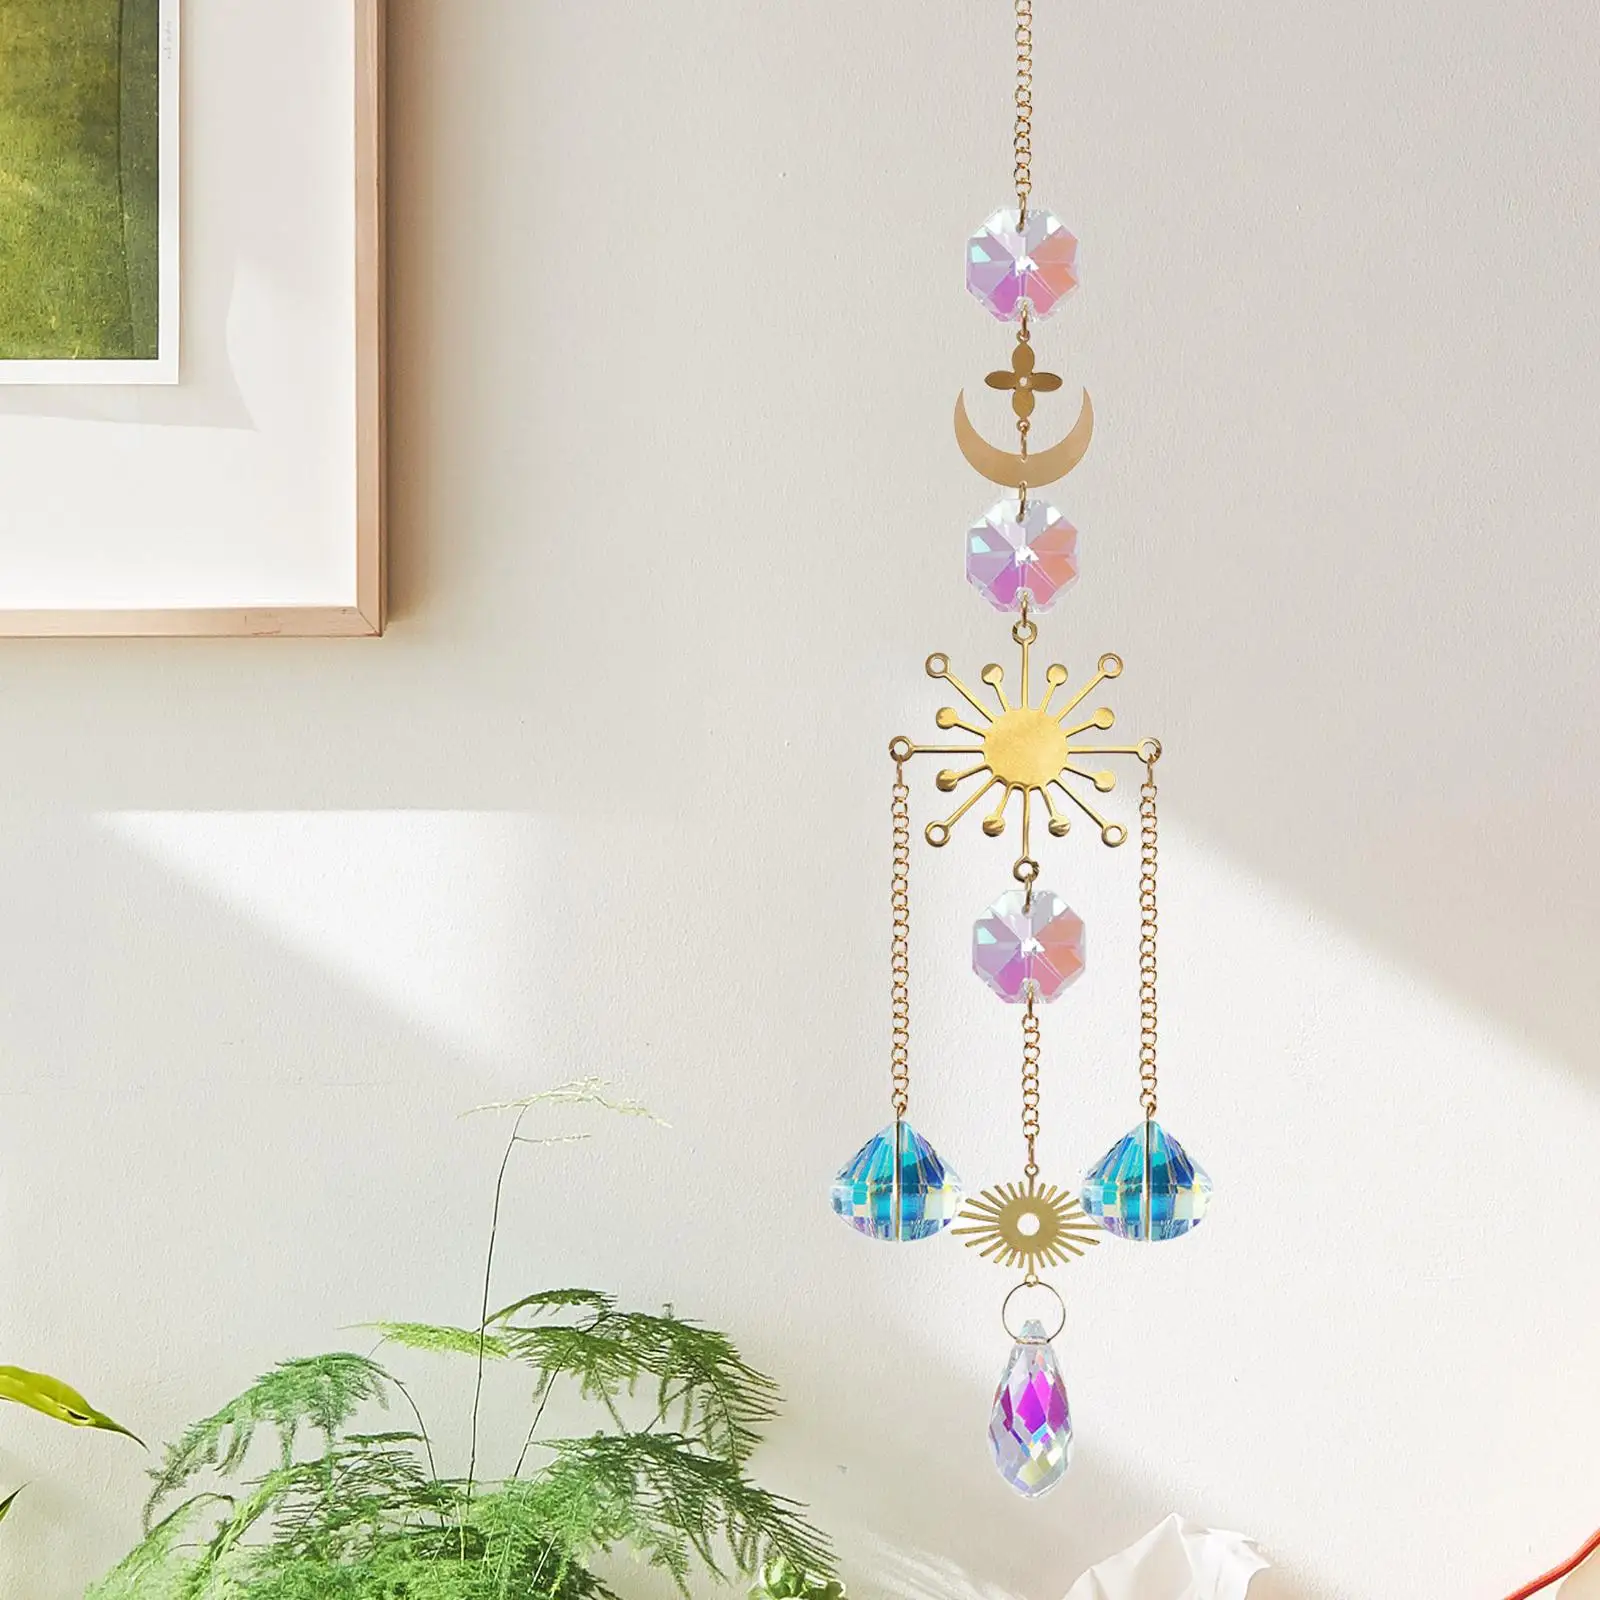 Hanging  Decor Ornaments Gold Decoration Gifts Crystal Rainbow  Pendant for Windows Garden Courtyard Yard Outside